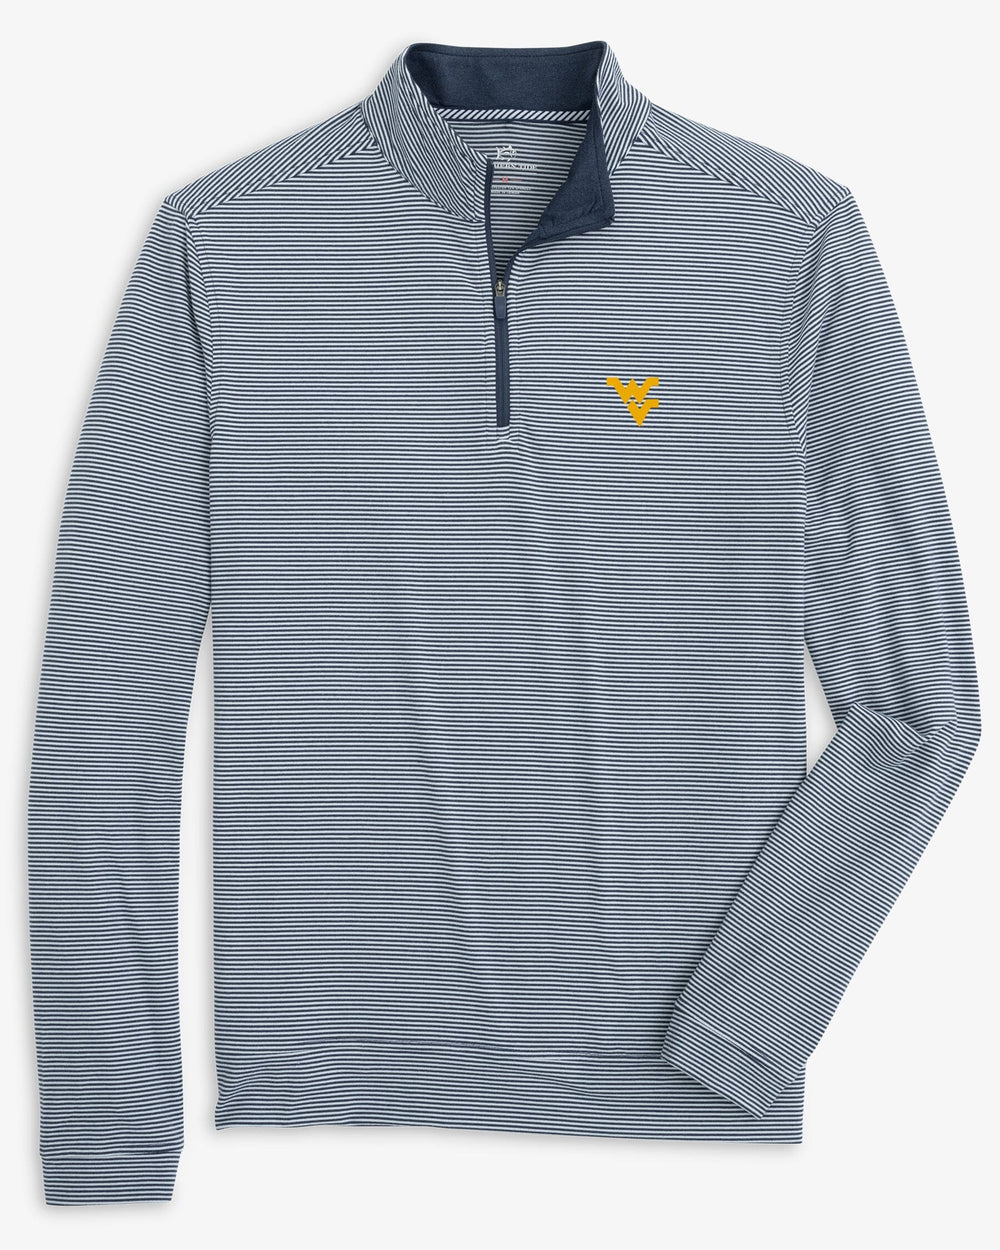 The front view of the West Virginia Cruiser Micro-Stripe Heather Quarter Zip by Southern Tide - Heather Navy